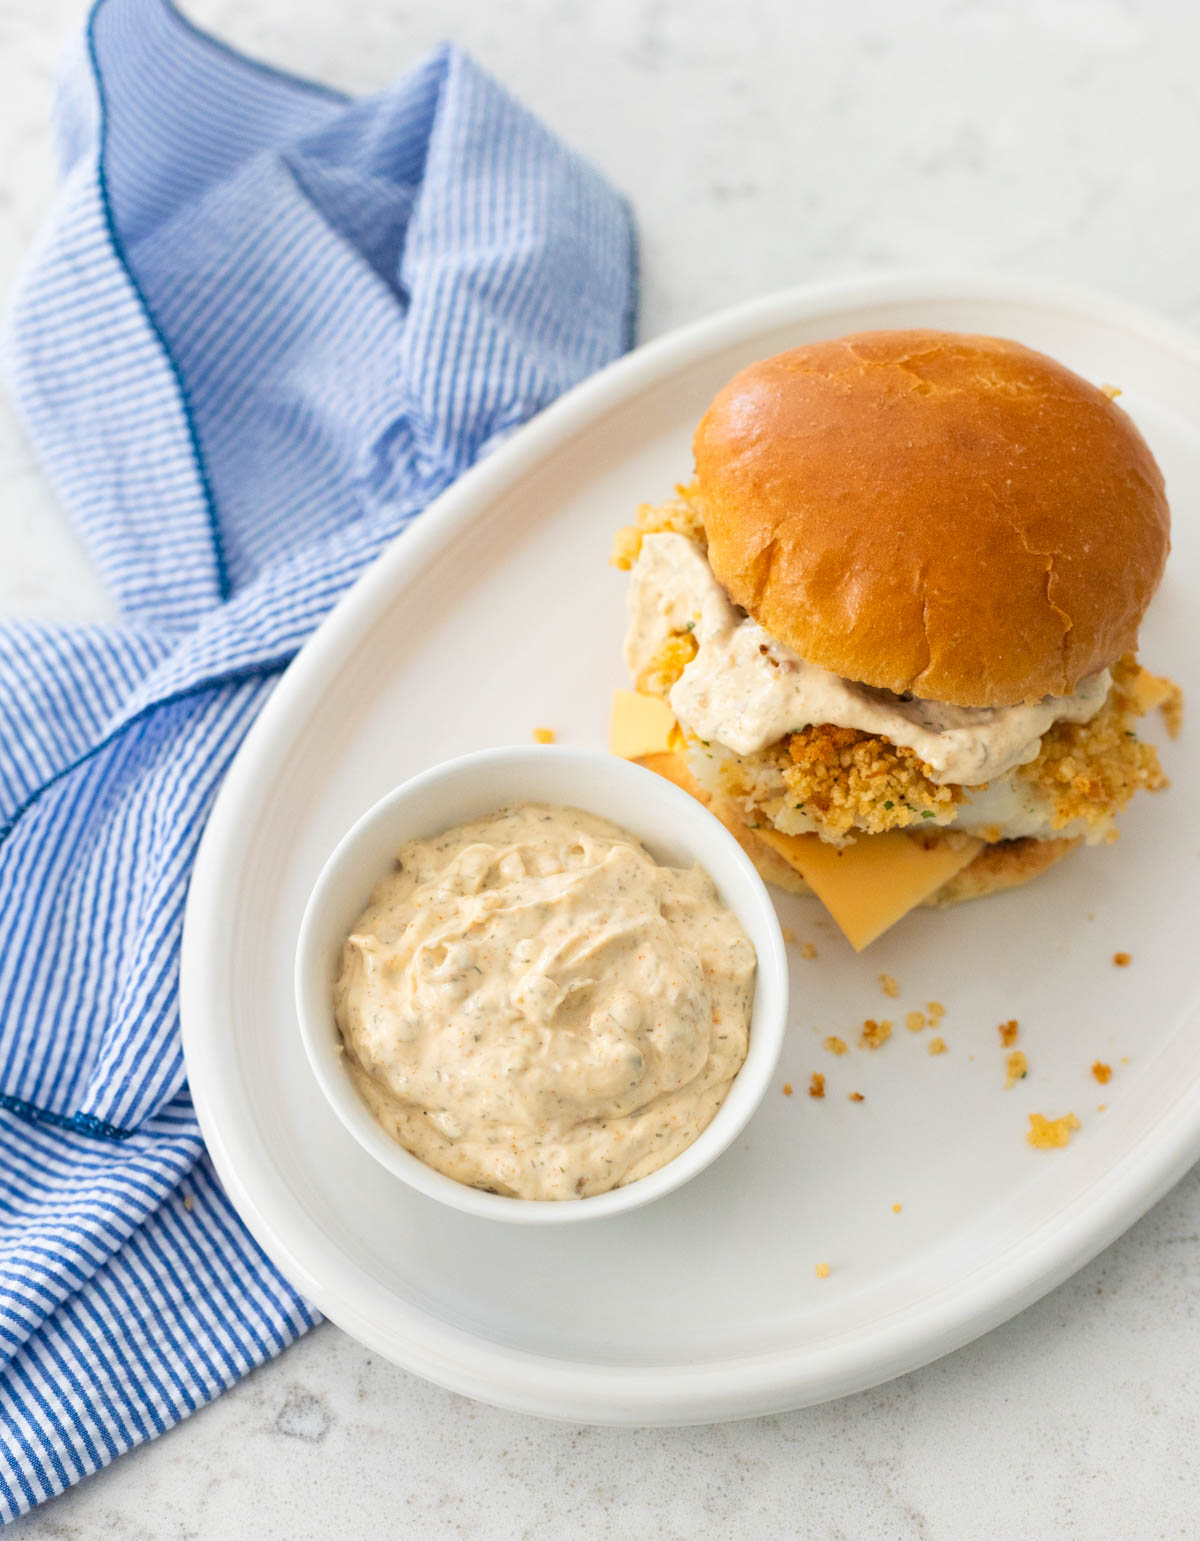 The tartar sauce is in a small cup sitting on a plate next to a fish sandwich.